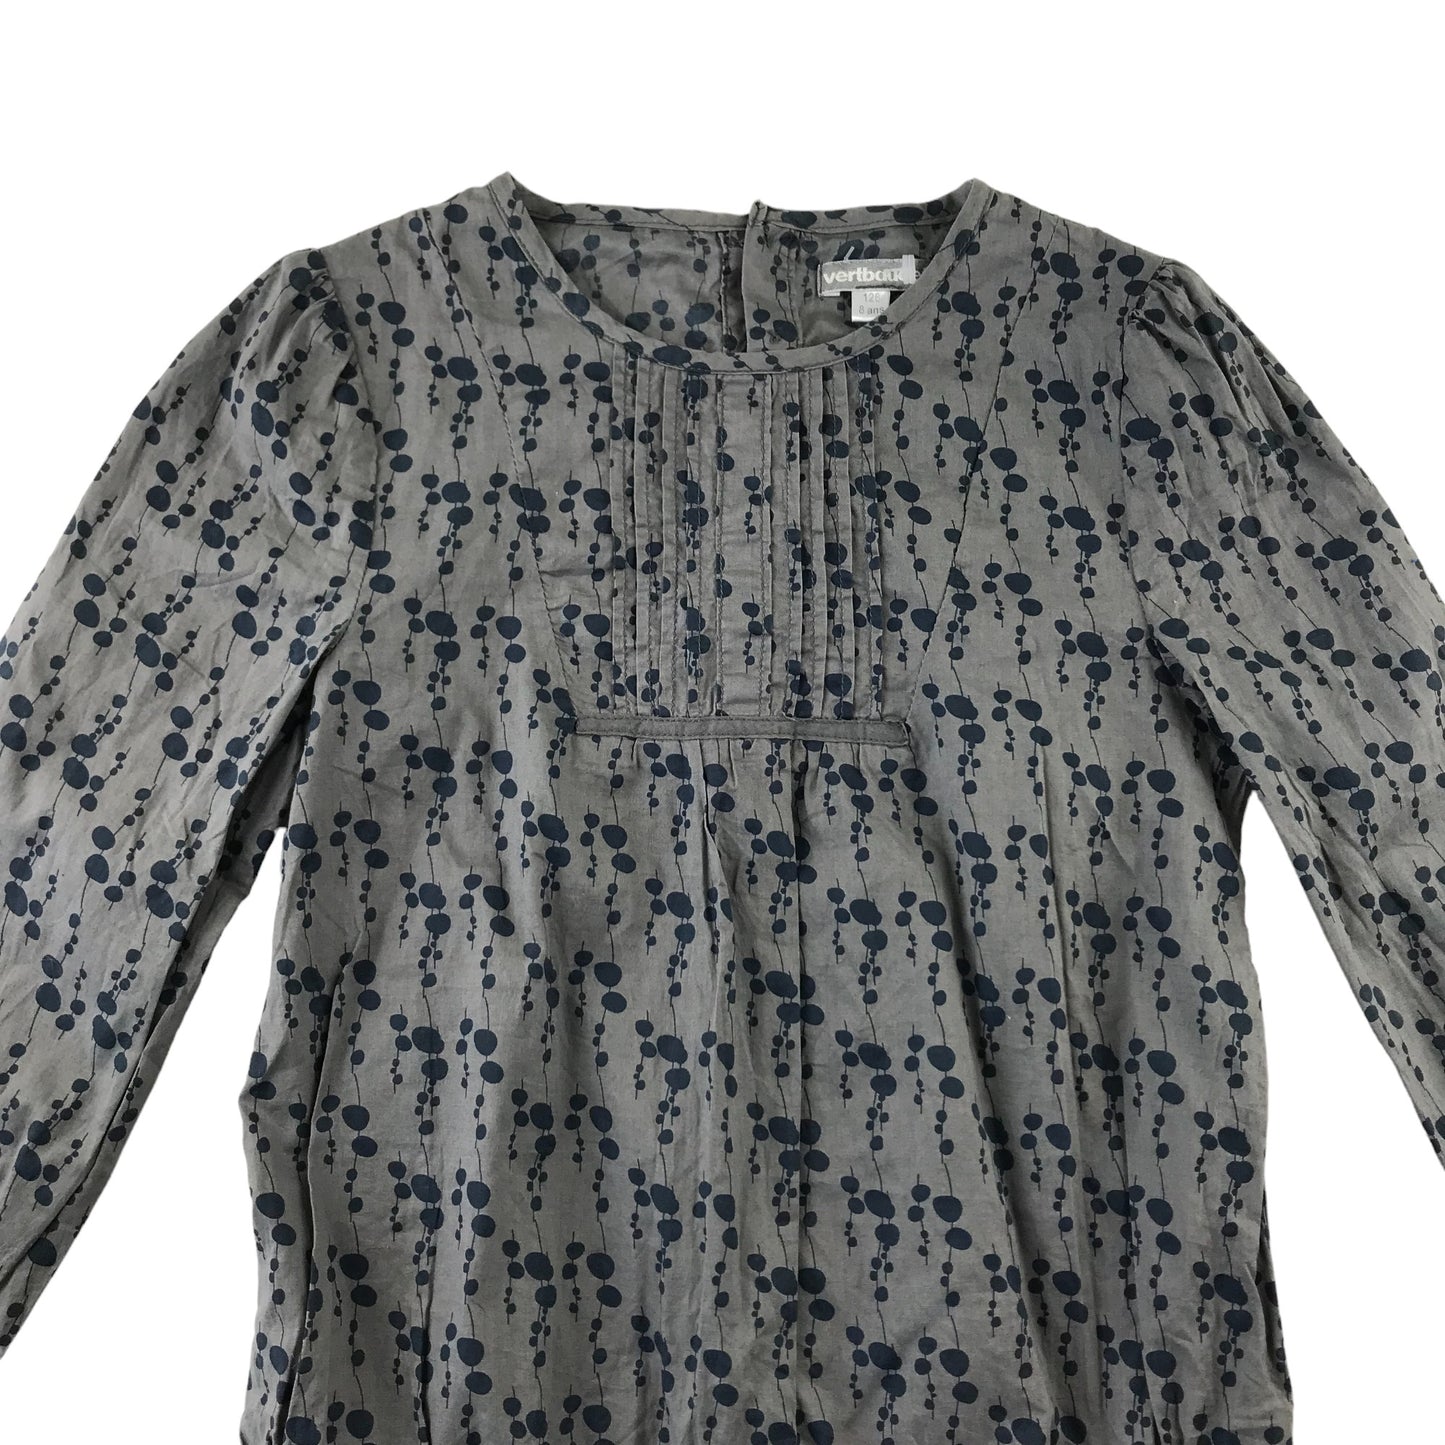 Vertbaudet blouse 8 years grey and navy graphic print design long sleeve Cotton